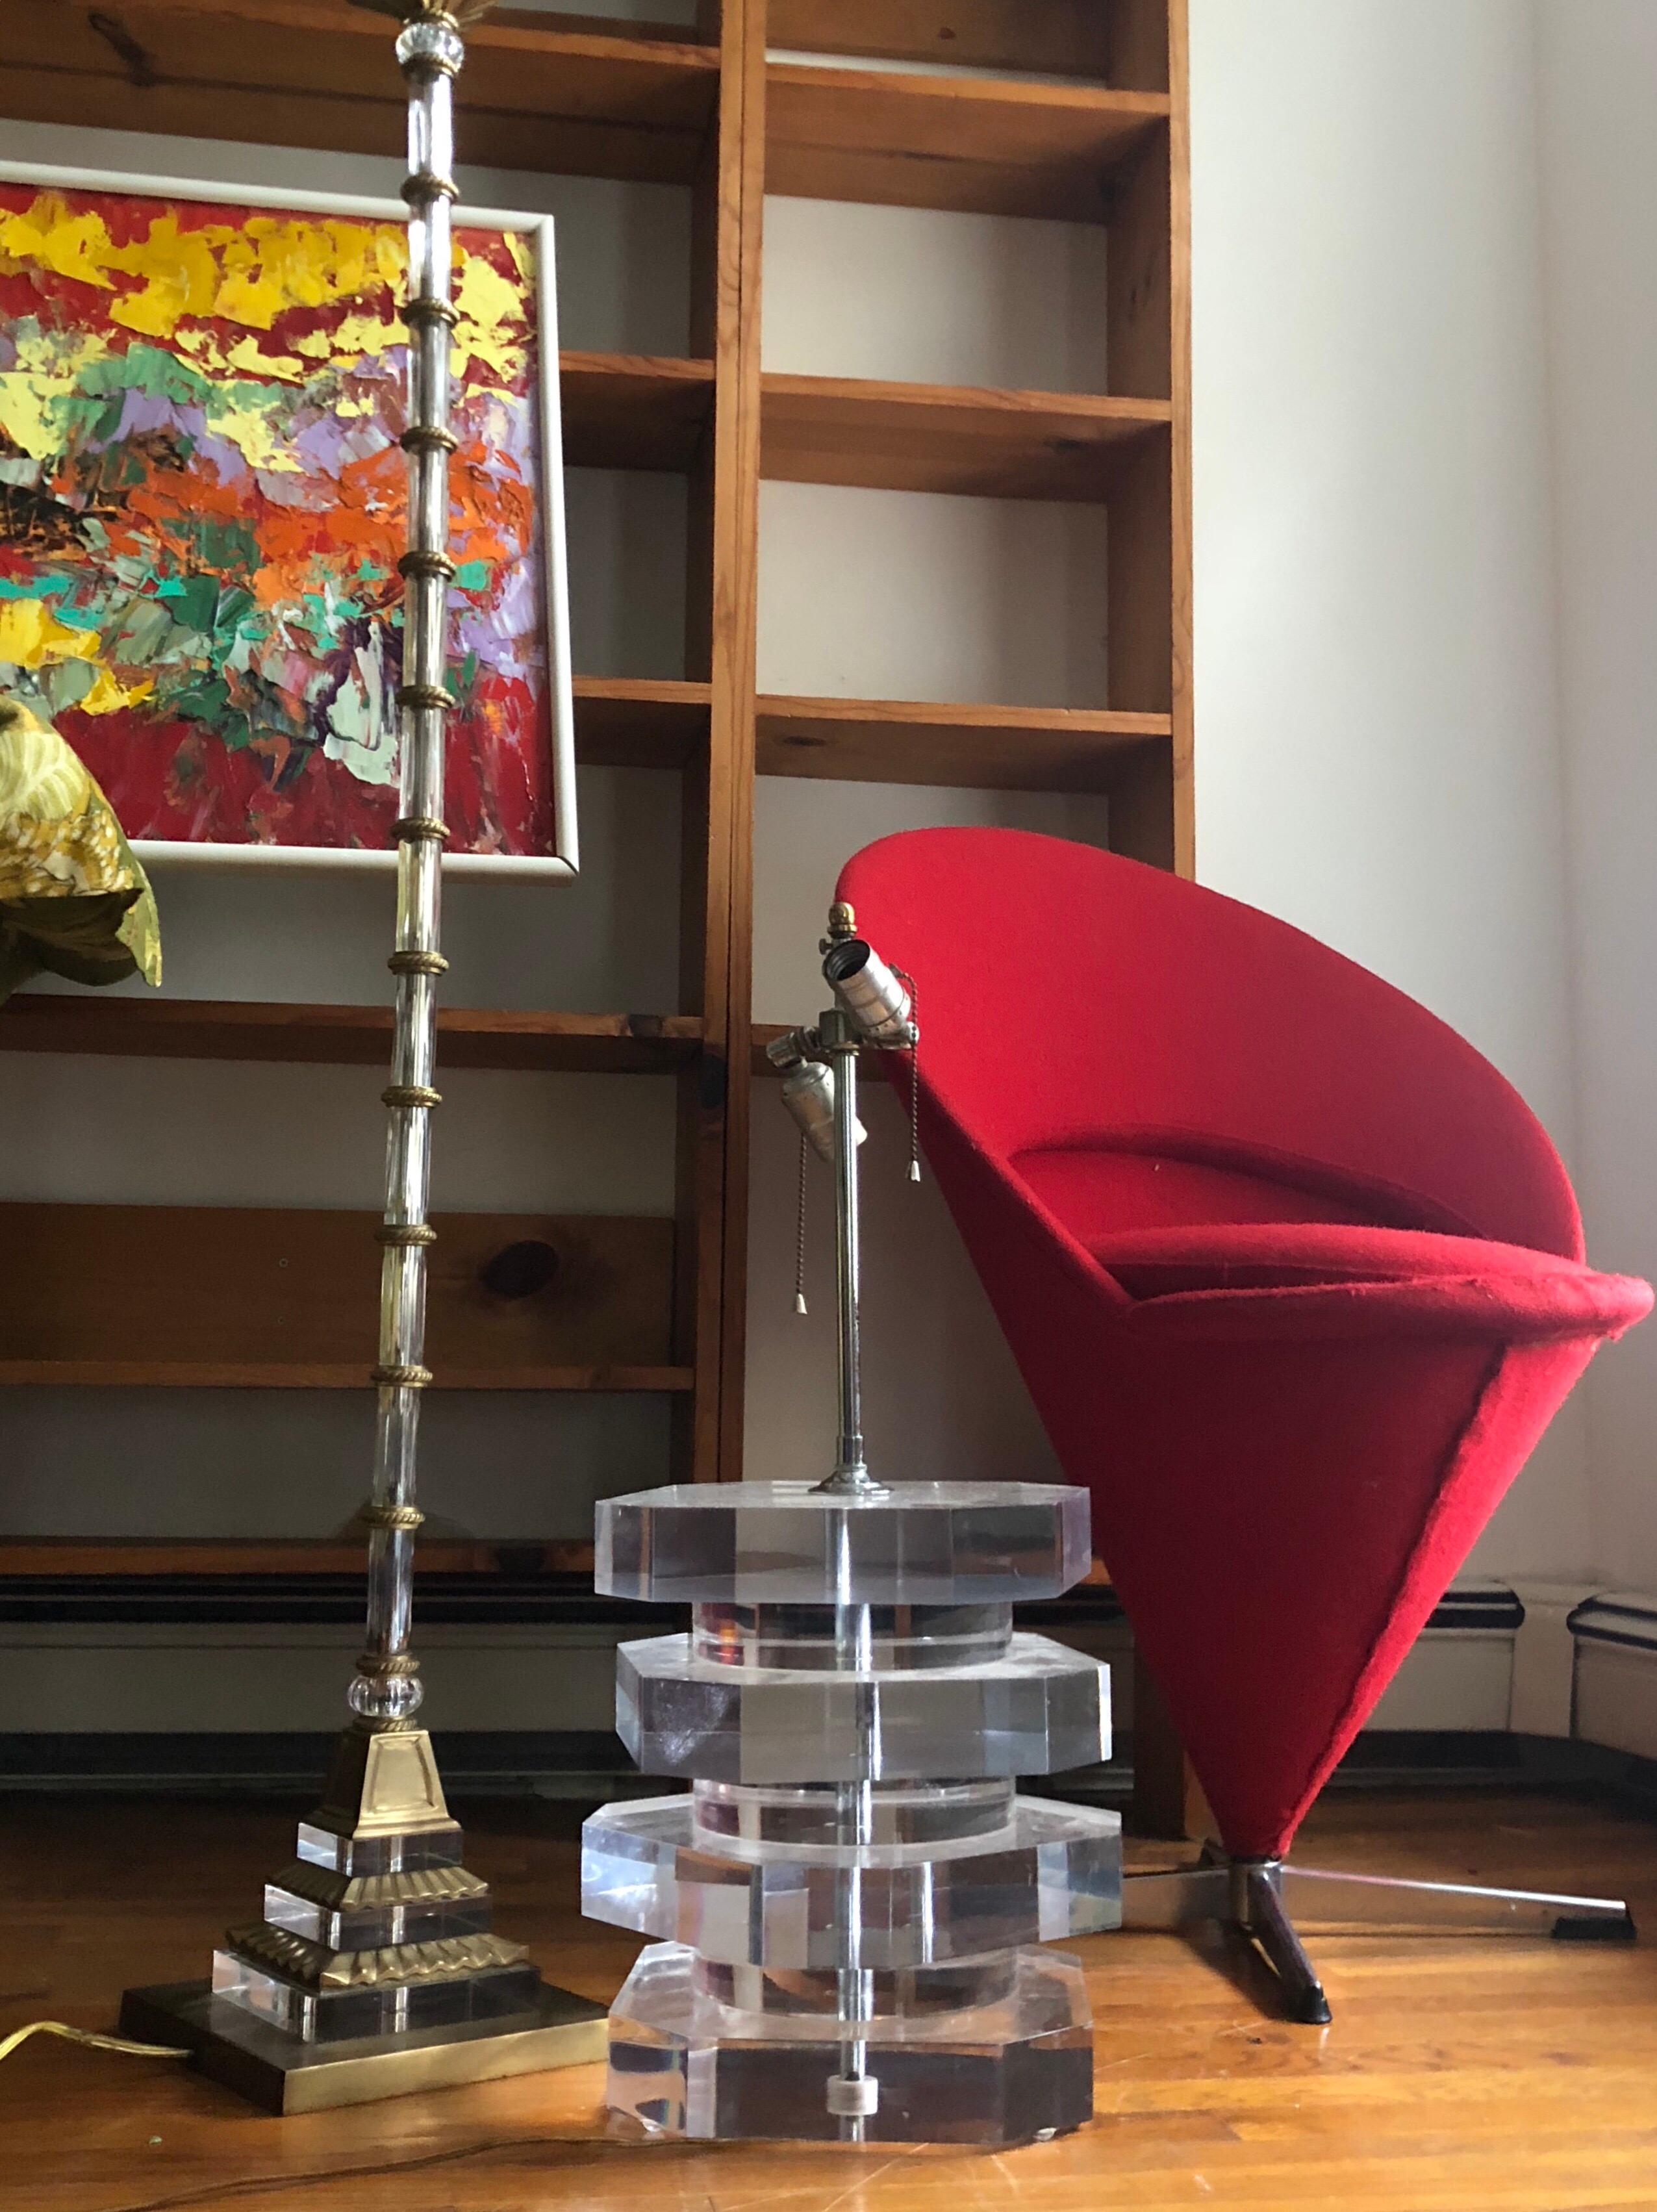 Verner Panton’s iconic cone chair in cherry red original upholstery. Very early run, 1958 or so. Extremely rare to find in such good vintage condition with original upholstery. There are some signs of age like some pitting on the metal, but